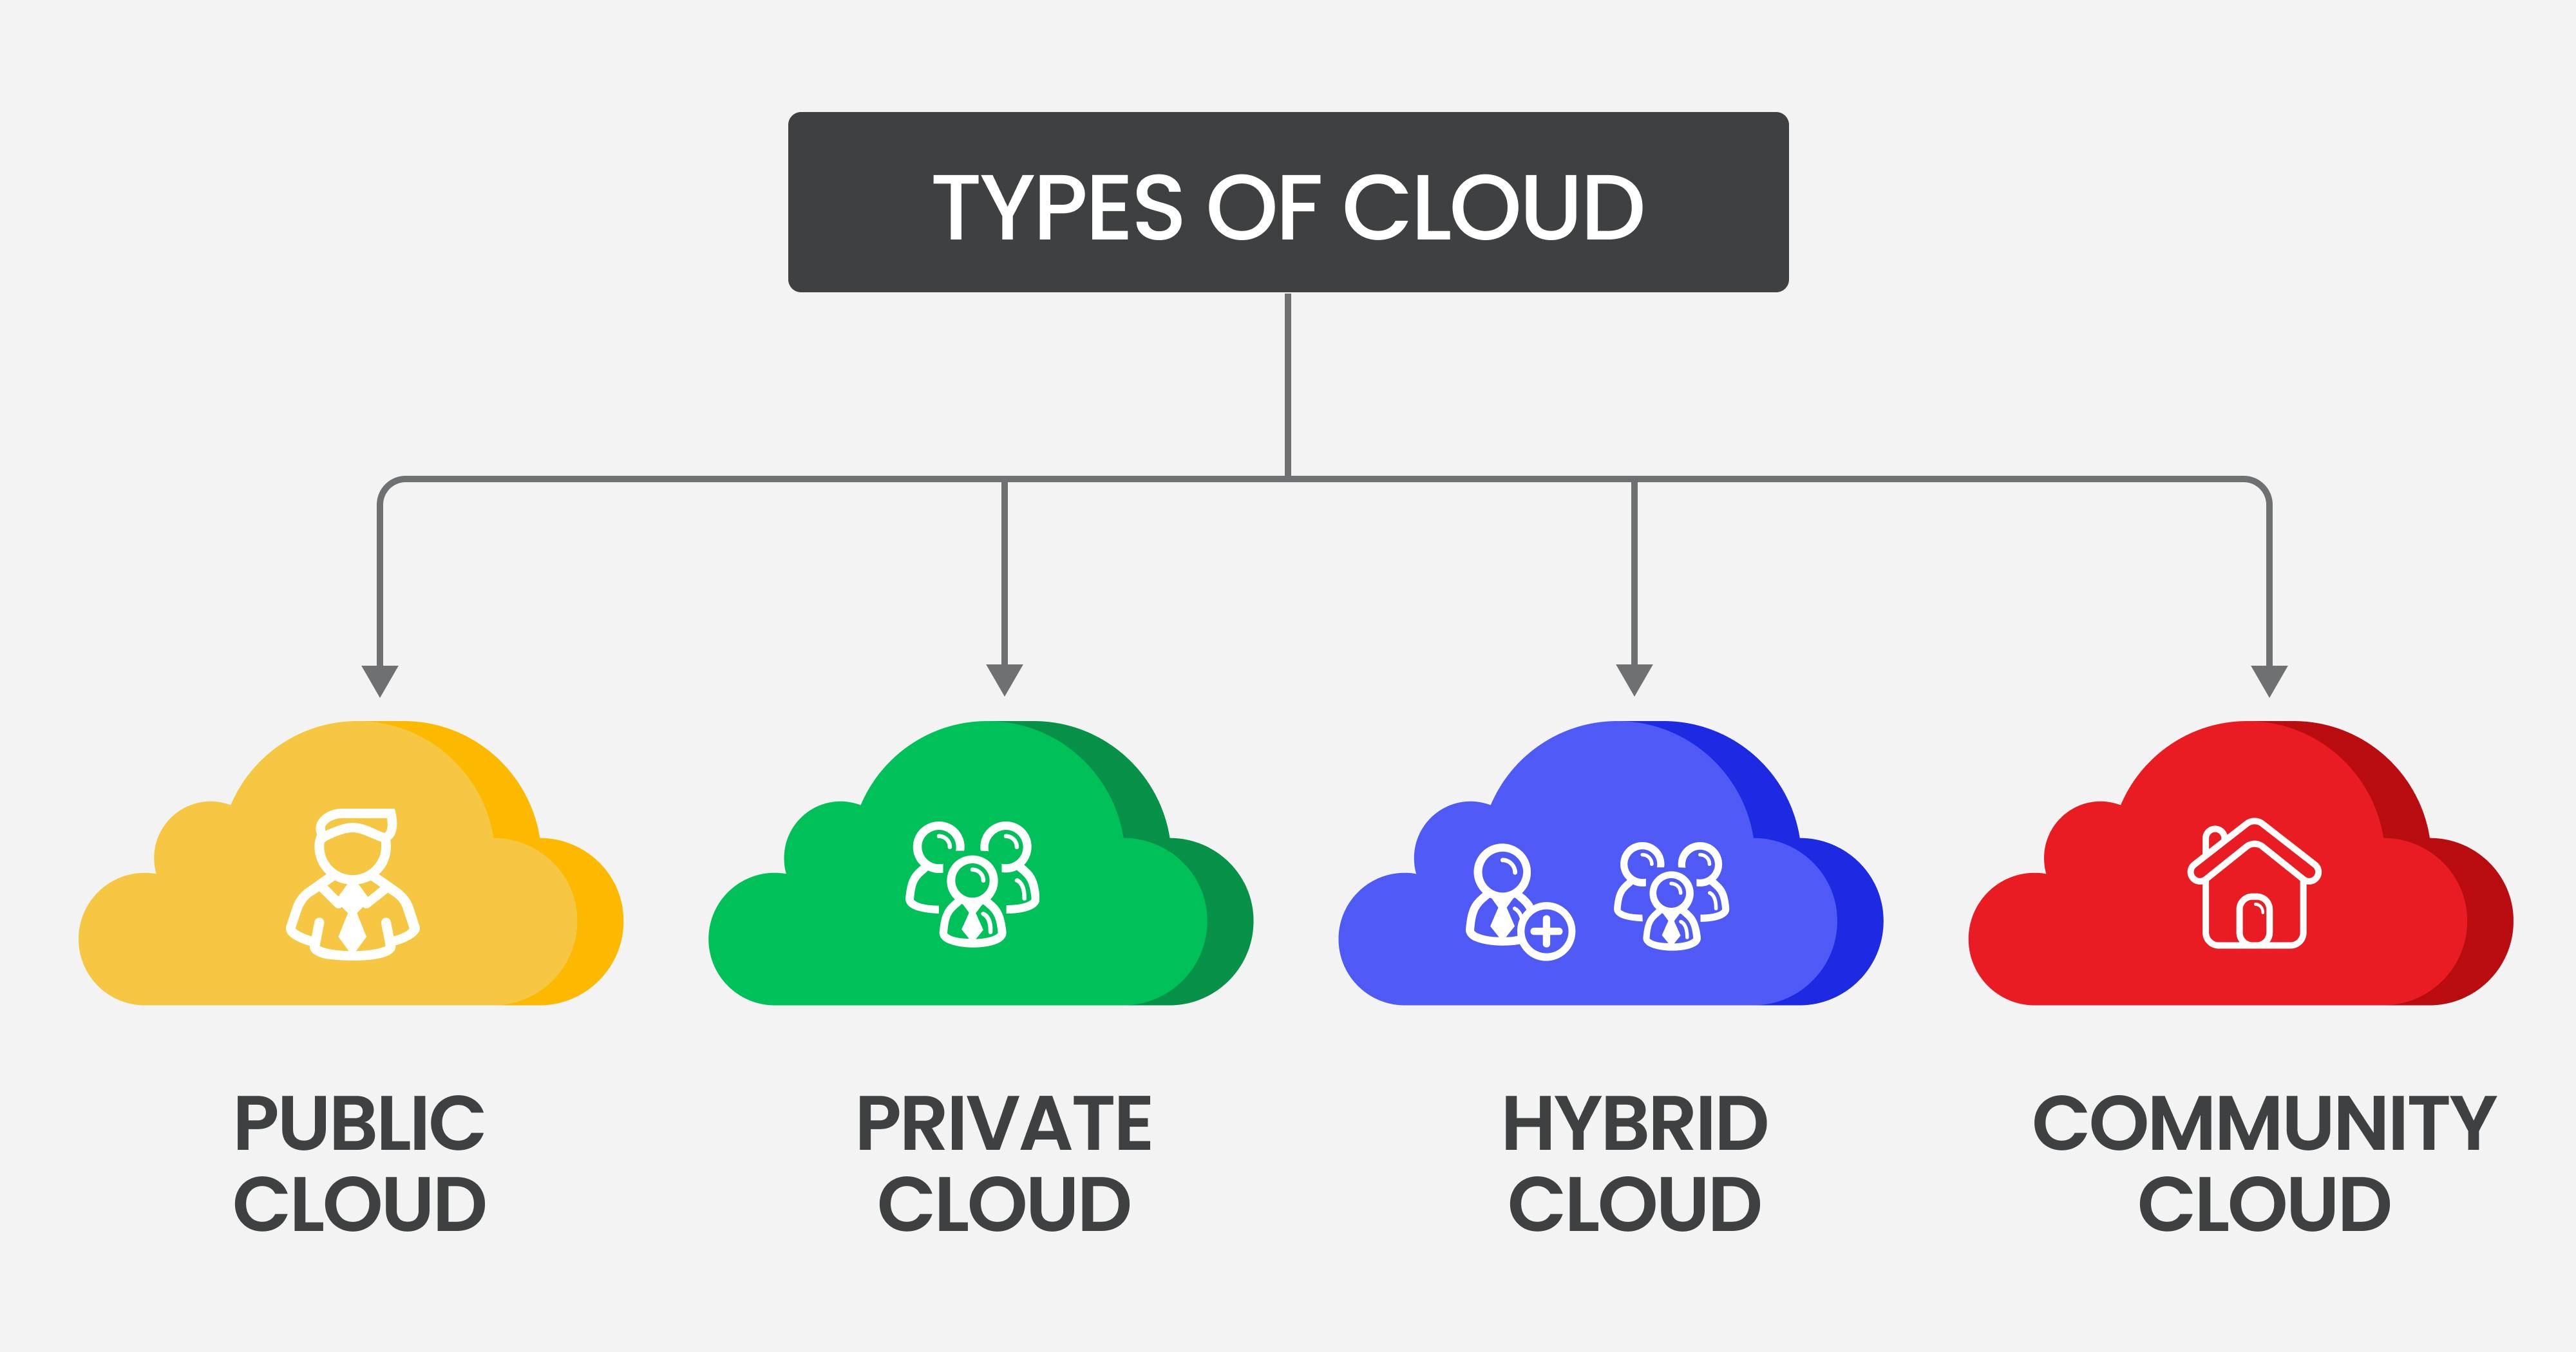  The image shows different types of cloud computing services: public, private, hybrid, and community cloud.